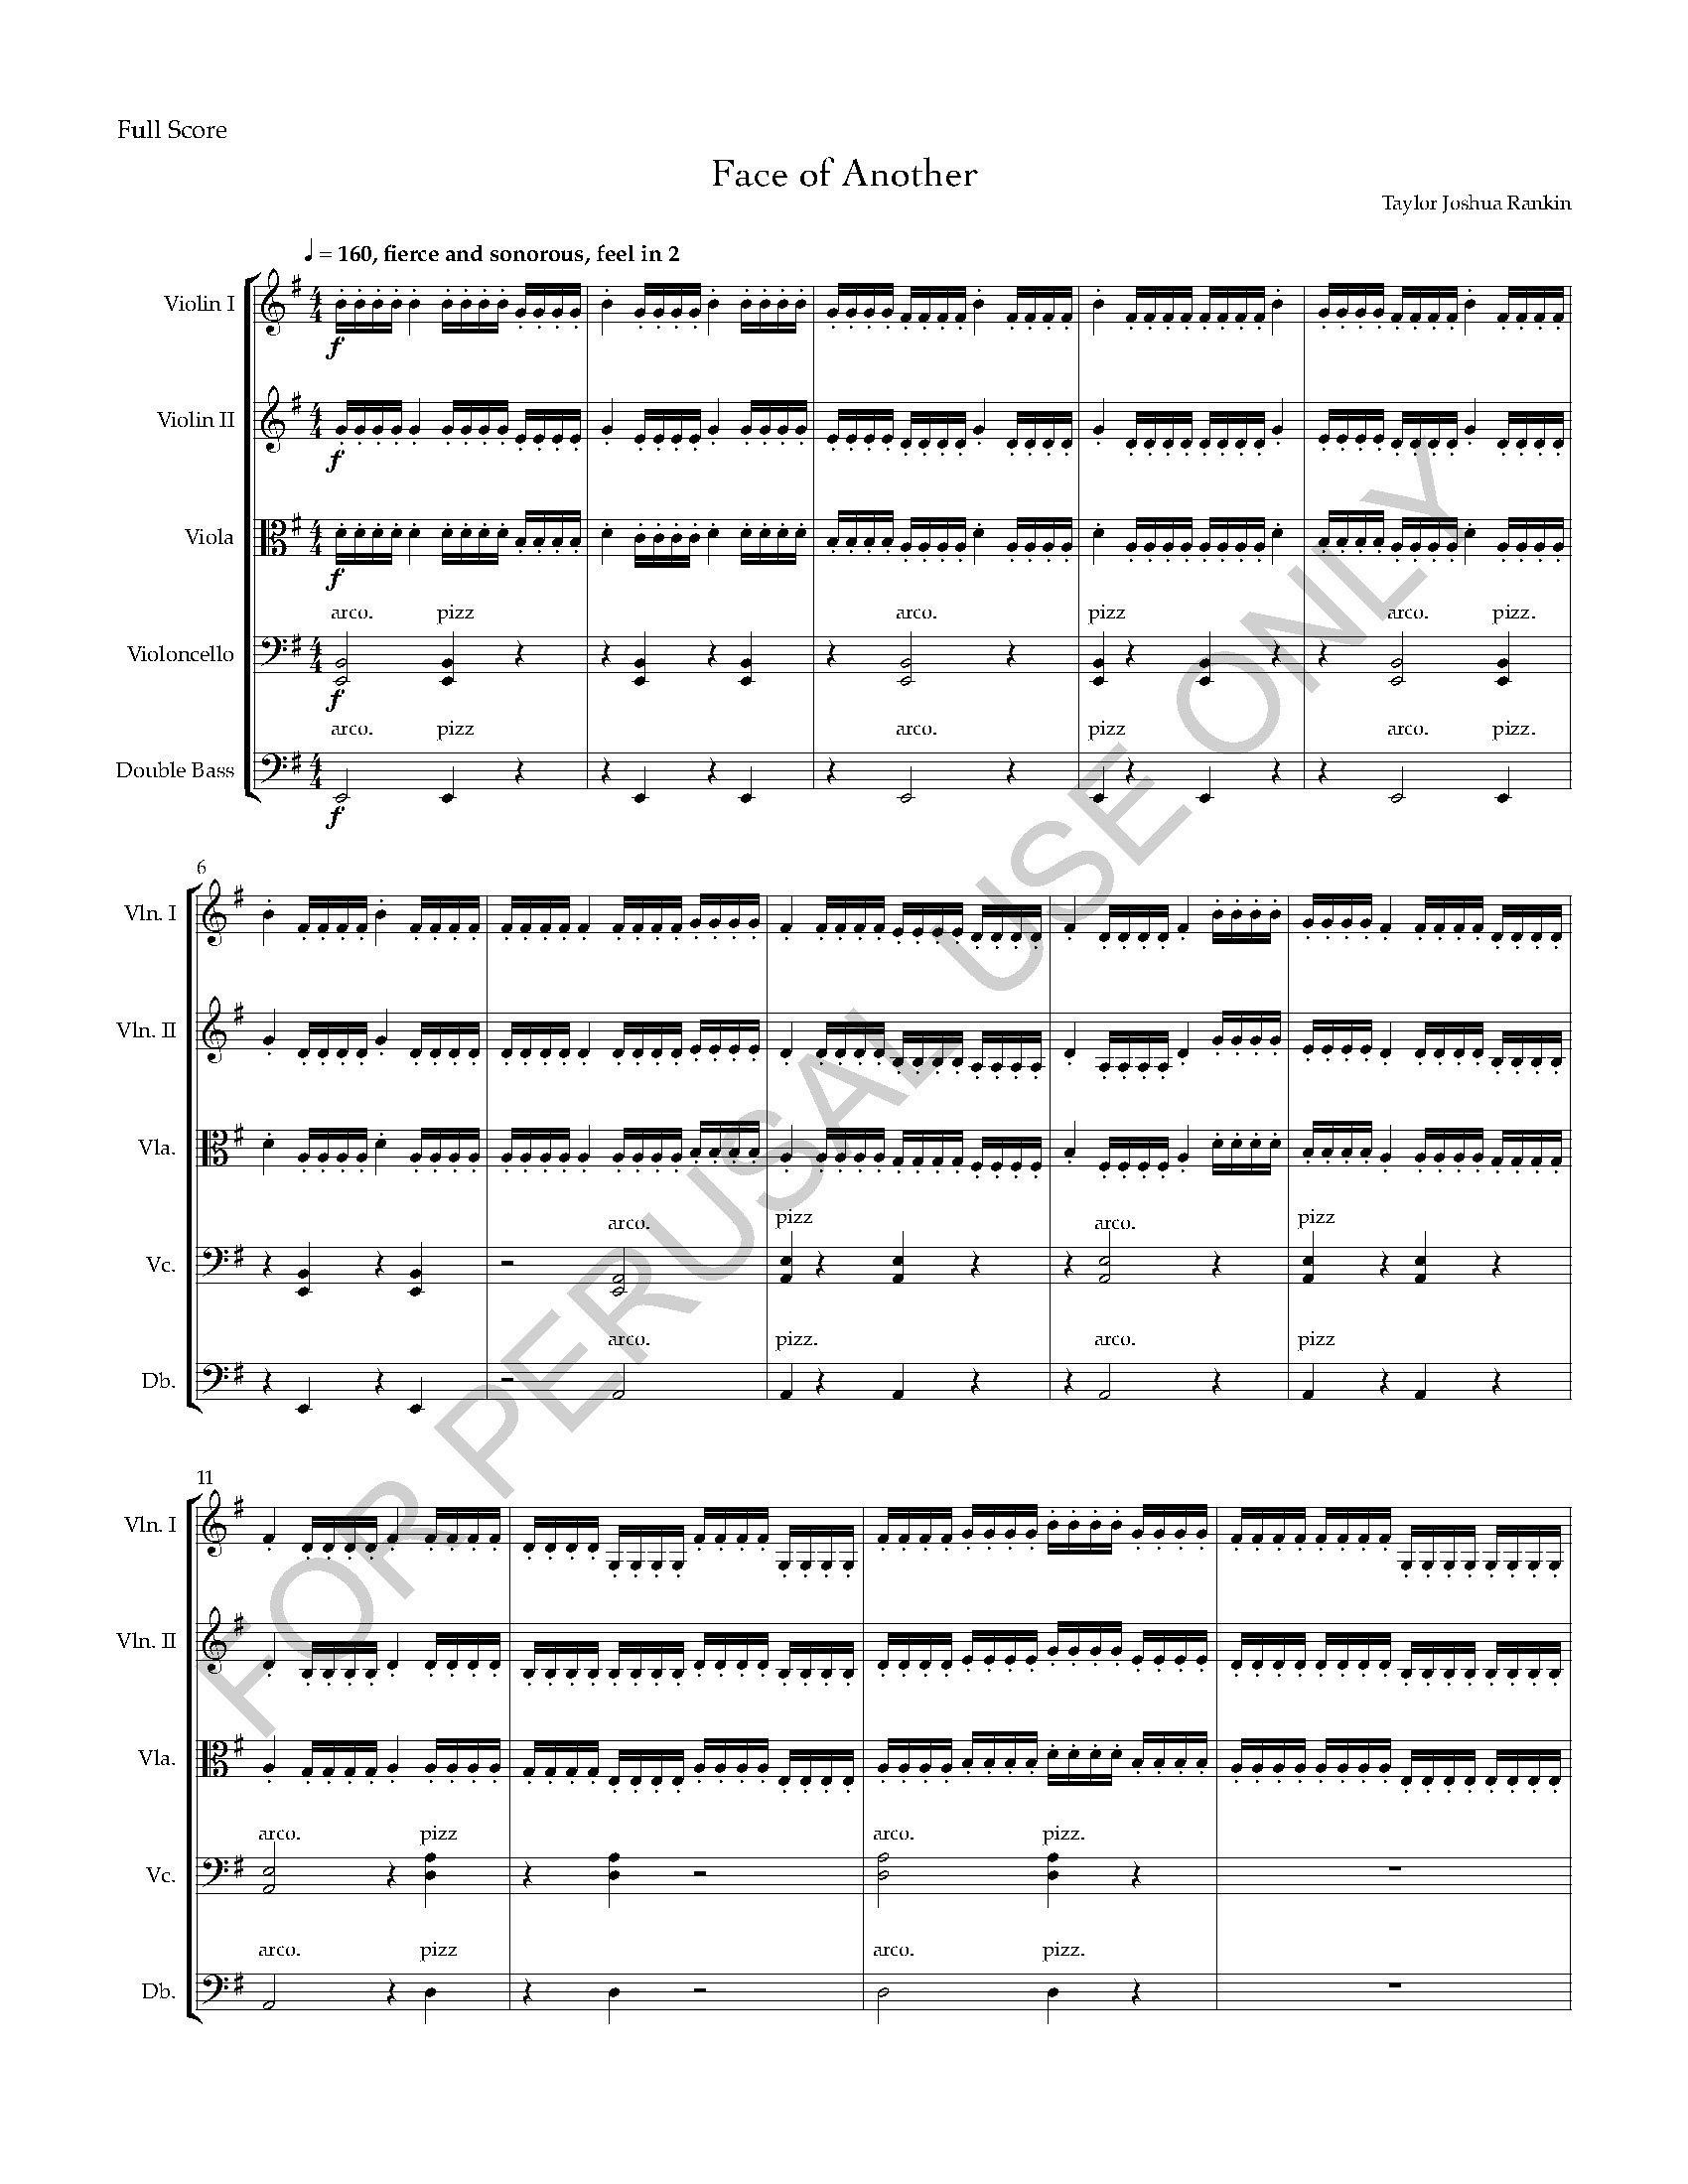 RANKIN - FACE OF ANOTHER - STRING QUINTET - PERFORMANCE MATERIALS_Page_01.jpg